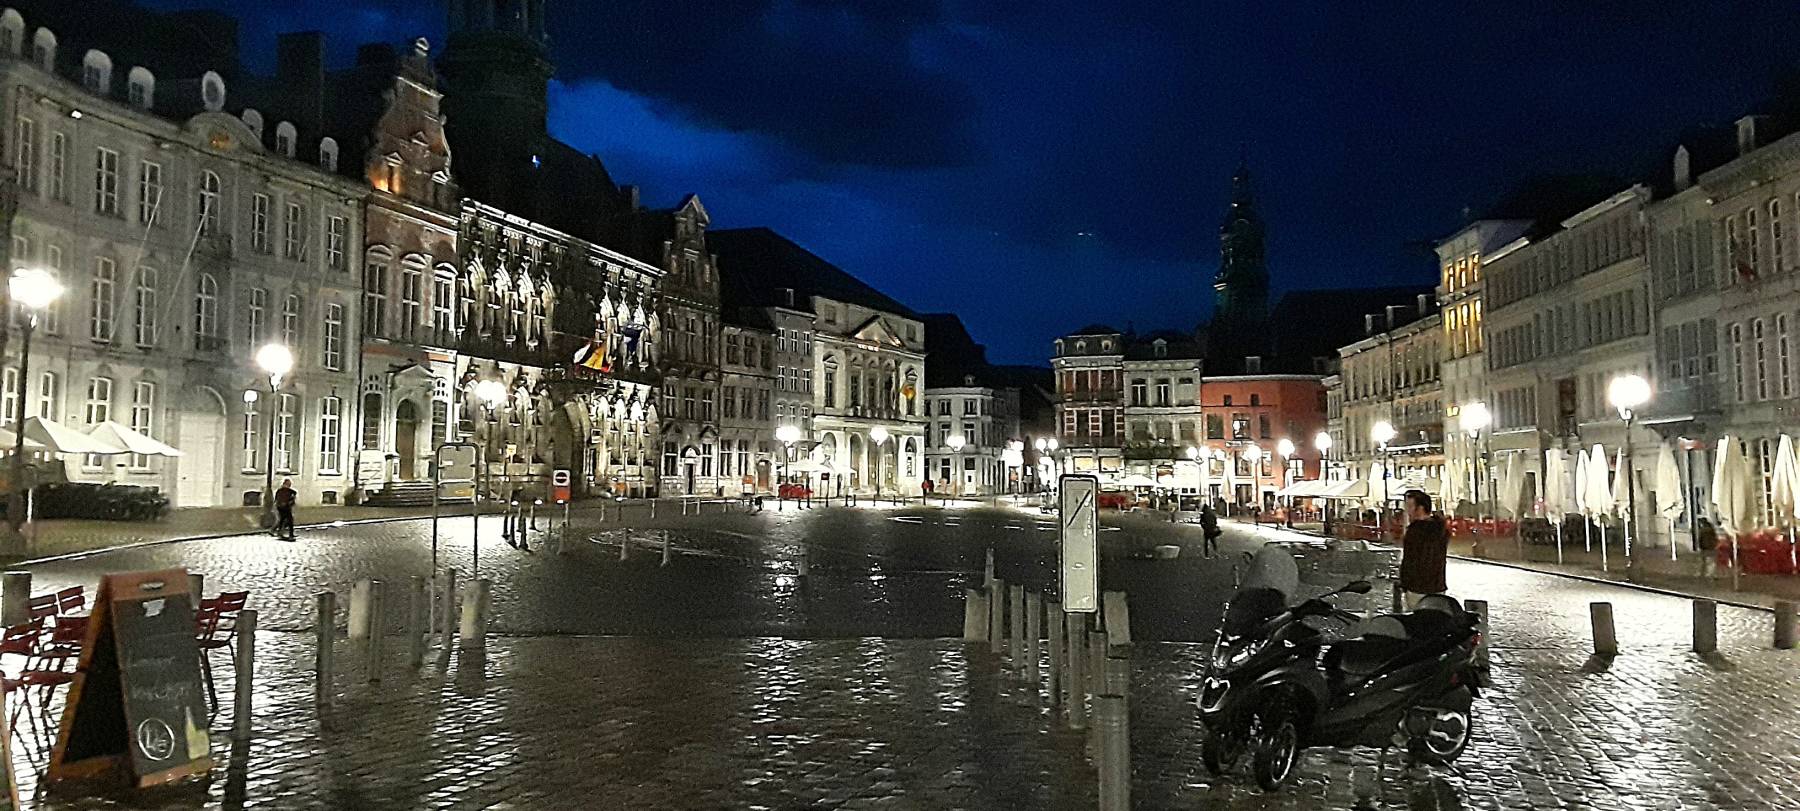 Old town square in Mons at night.